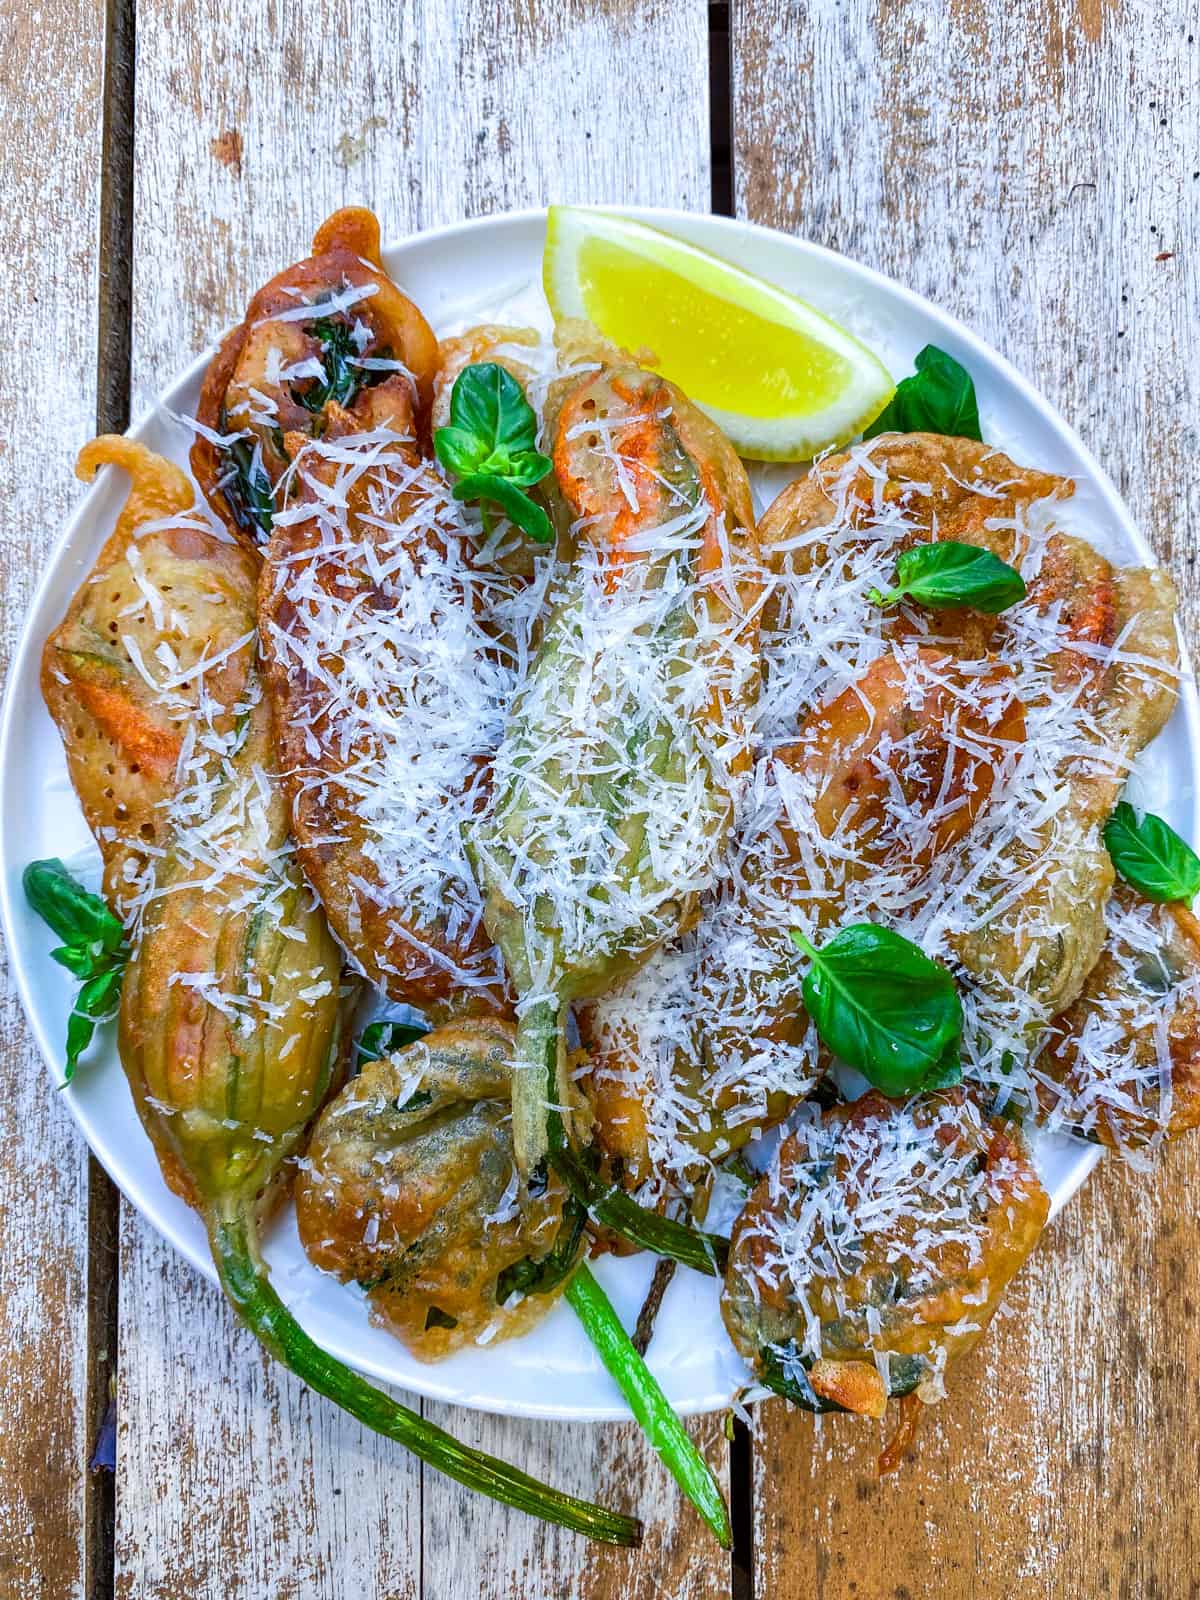 Squash flower fritters dusted with Parmesan and garnished with fresh basil and lemon.